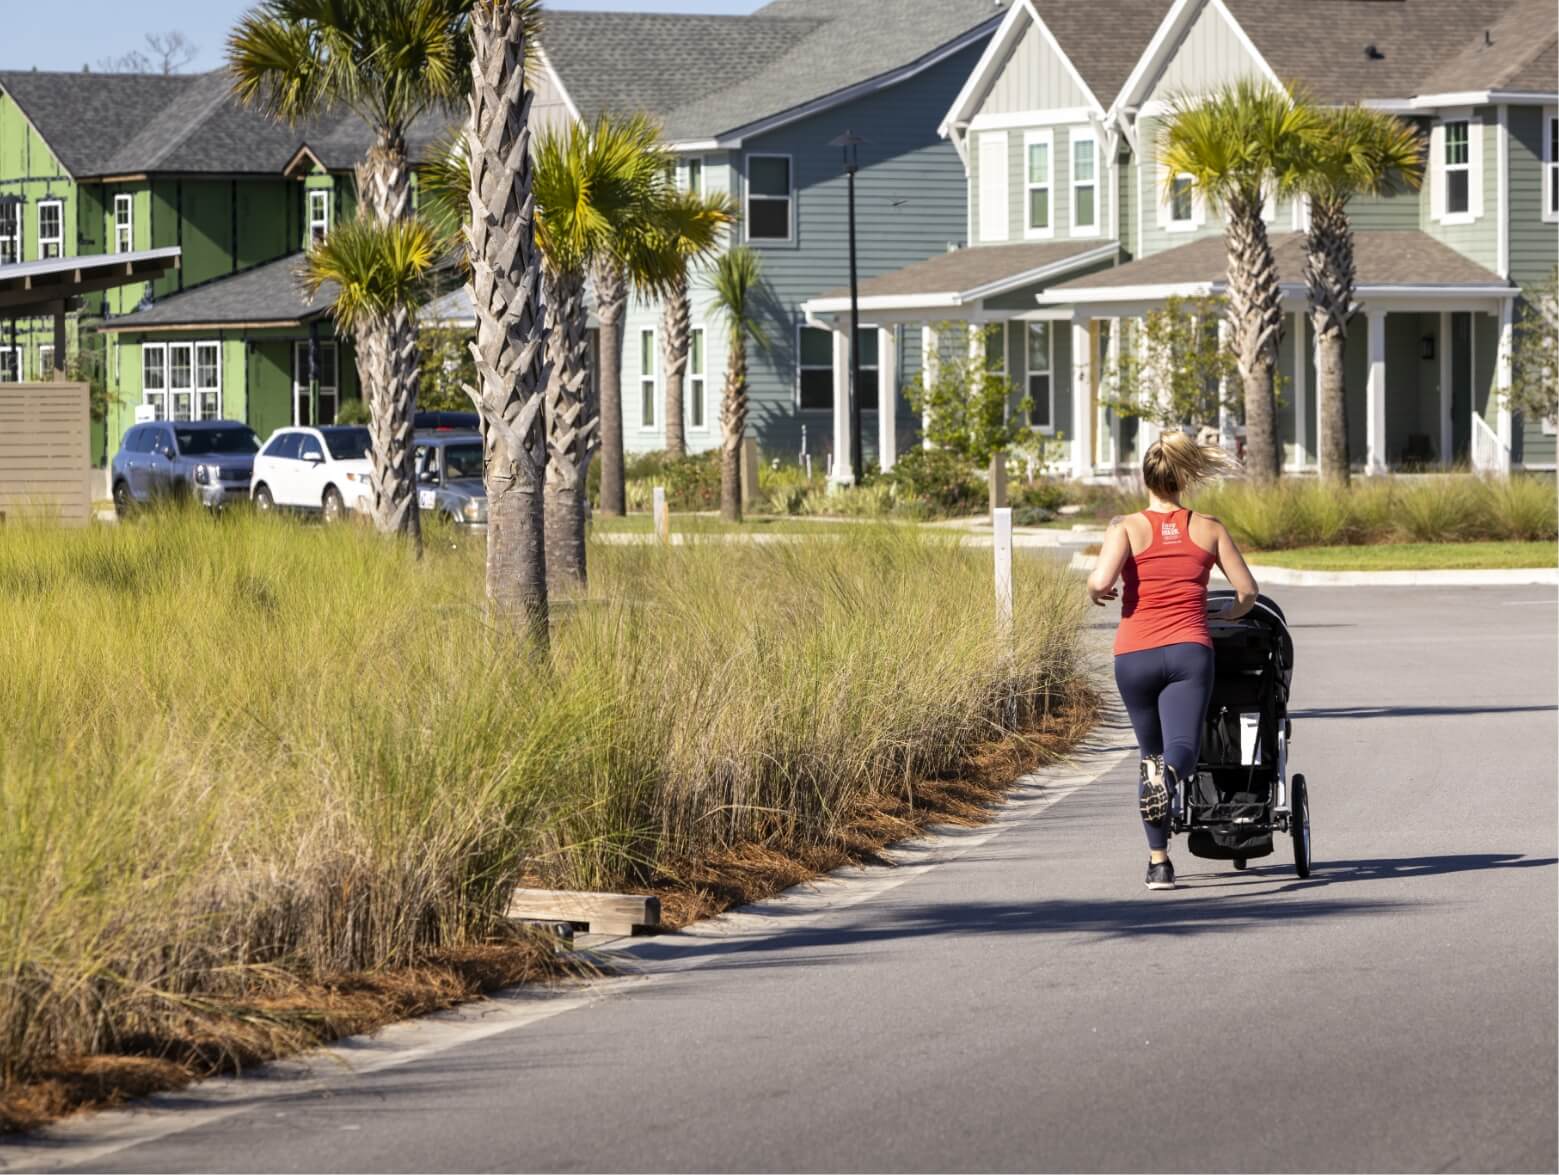 Woman in a red tank top going for a run in the neighborhood with a stroller on a trail near a street lined with houses.